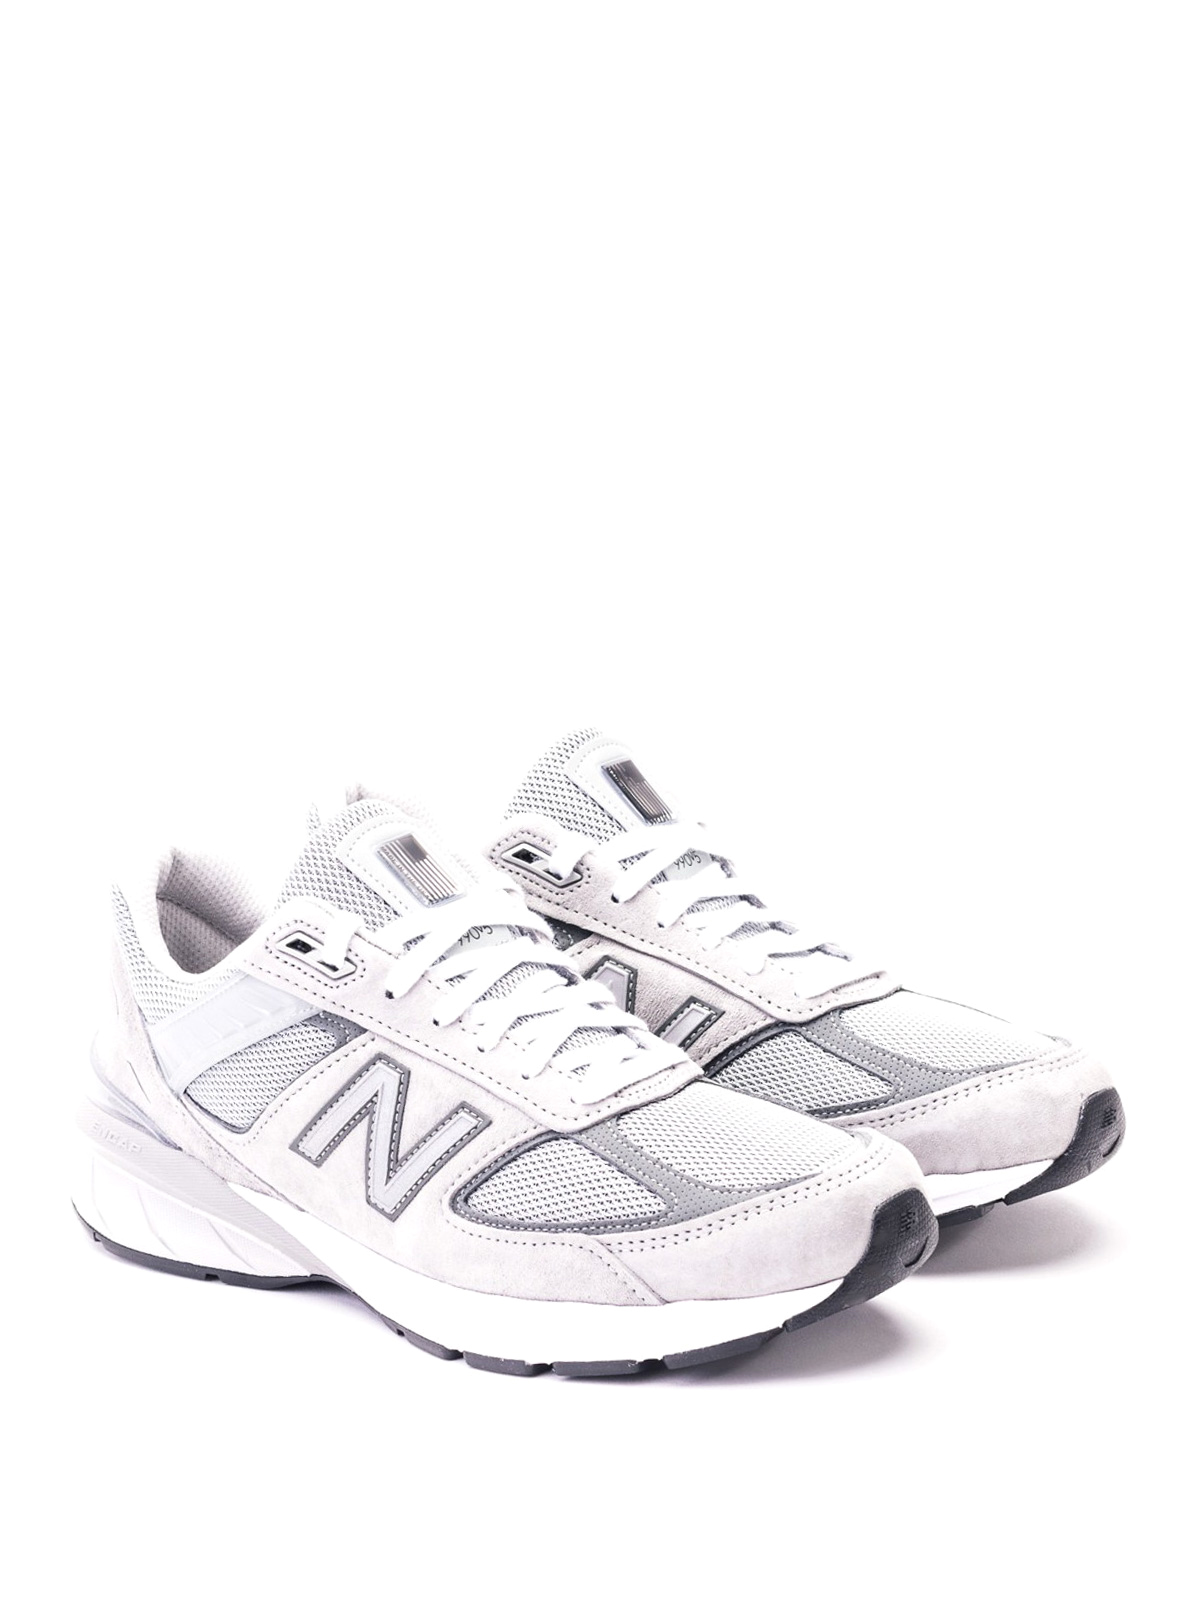 Trainers New Balance - 990v5 white tech mesh and suede sneakers ...